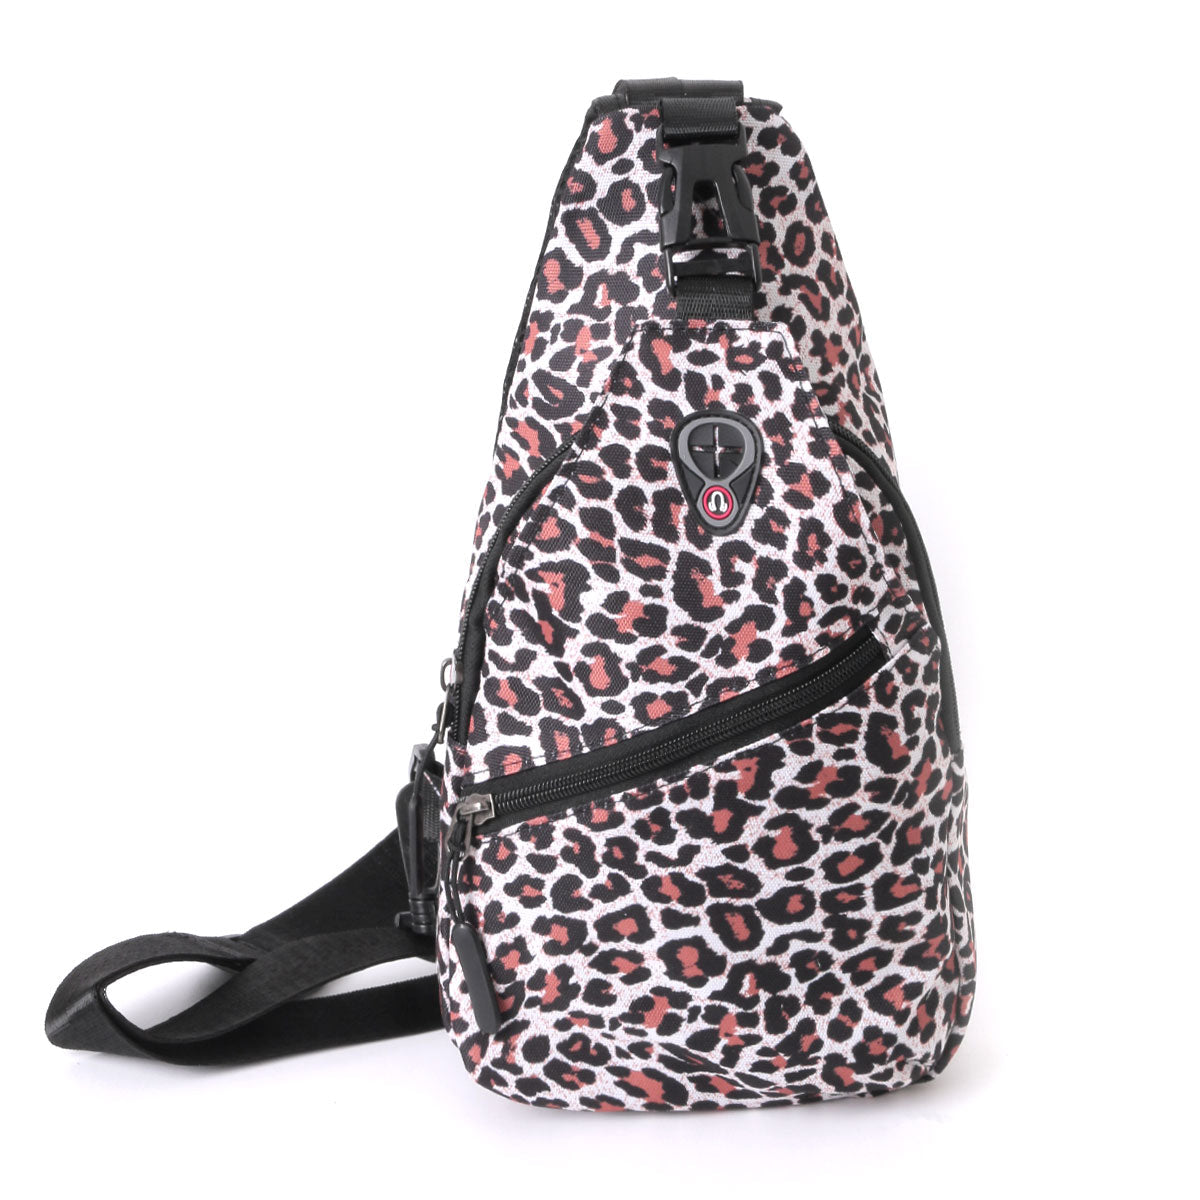 Premium On The Go Leopard And Aztec Sling Bag